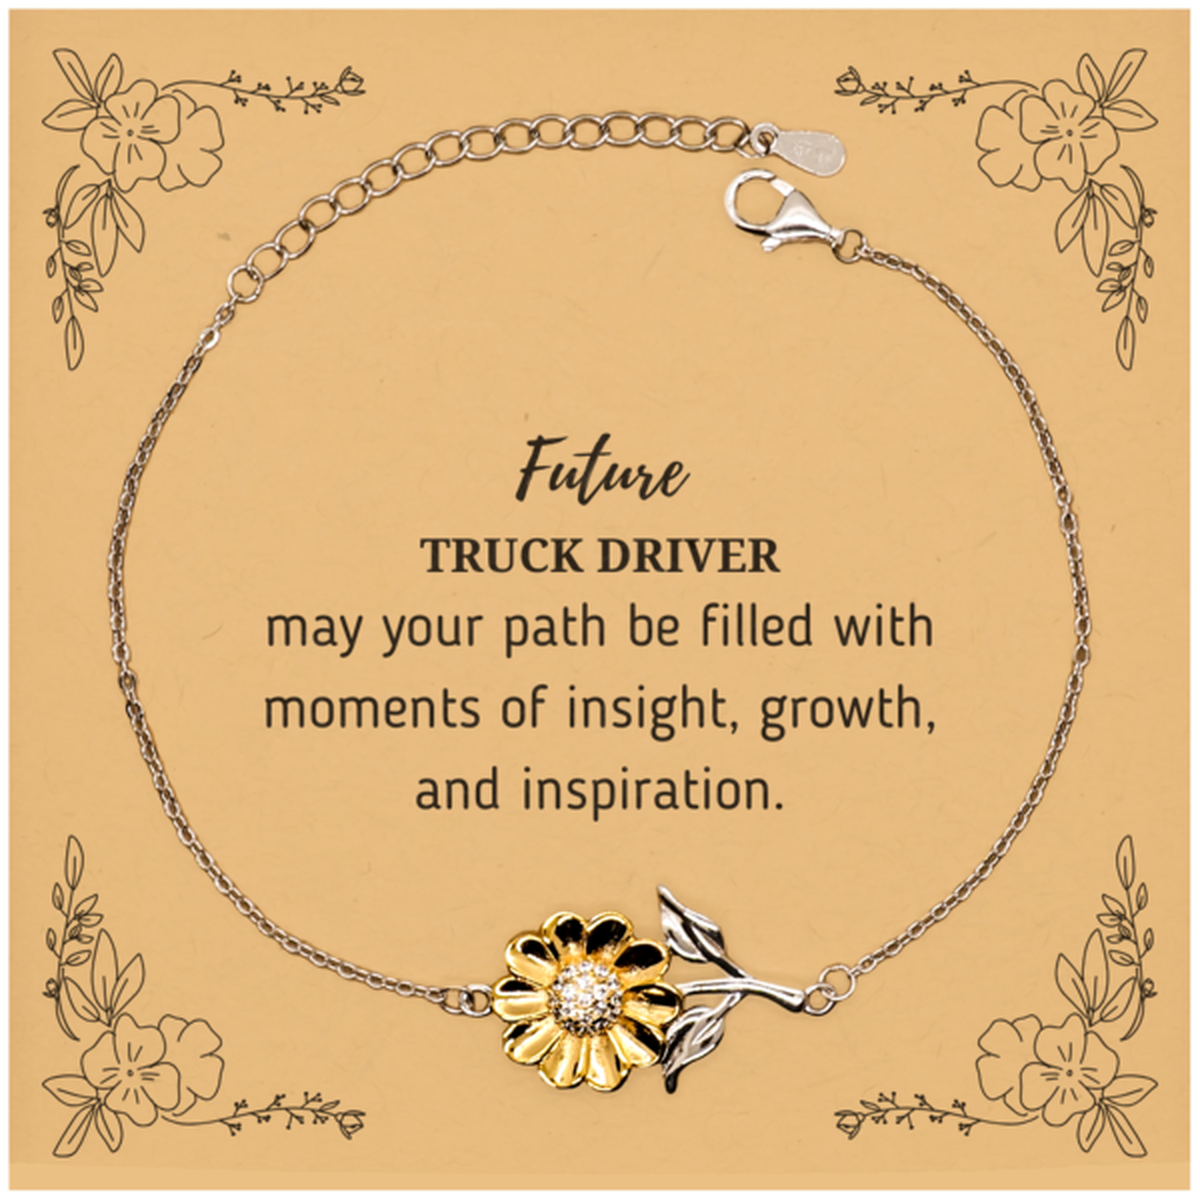 Future Truck Driver Gifts, May your path be filled with moments of insight, Graduation Gifts for New Truck Driver, Christmas Unique Sunflower Bracelet For Men, Women, Friends